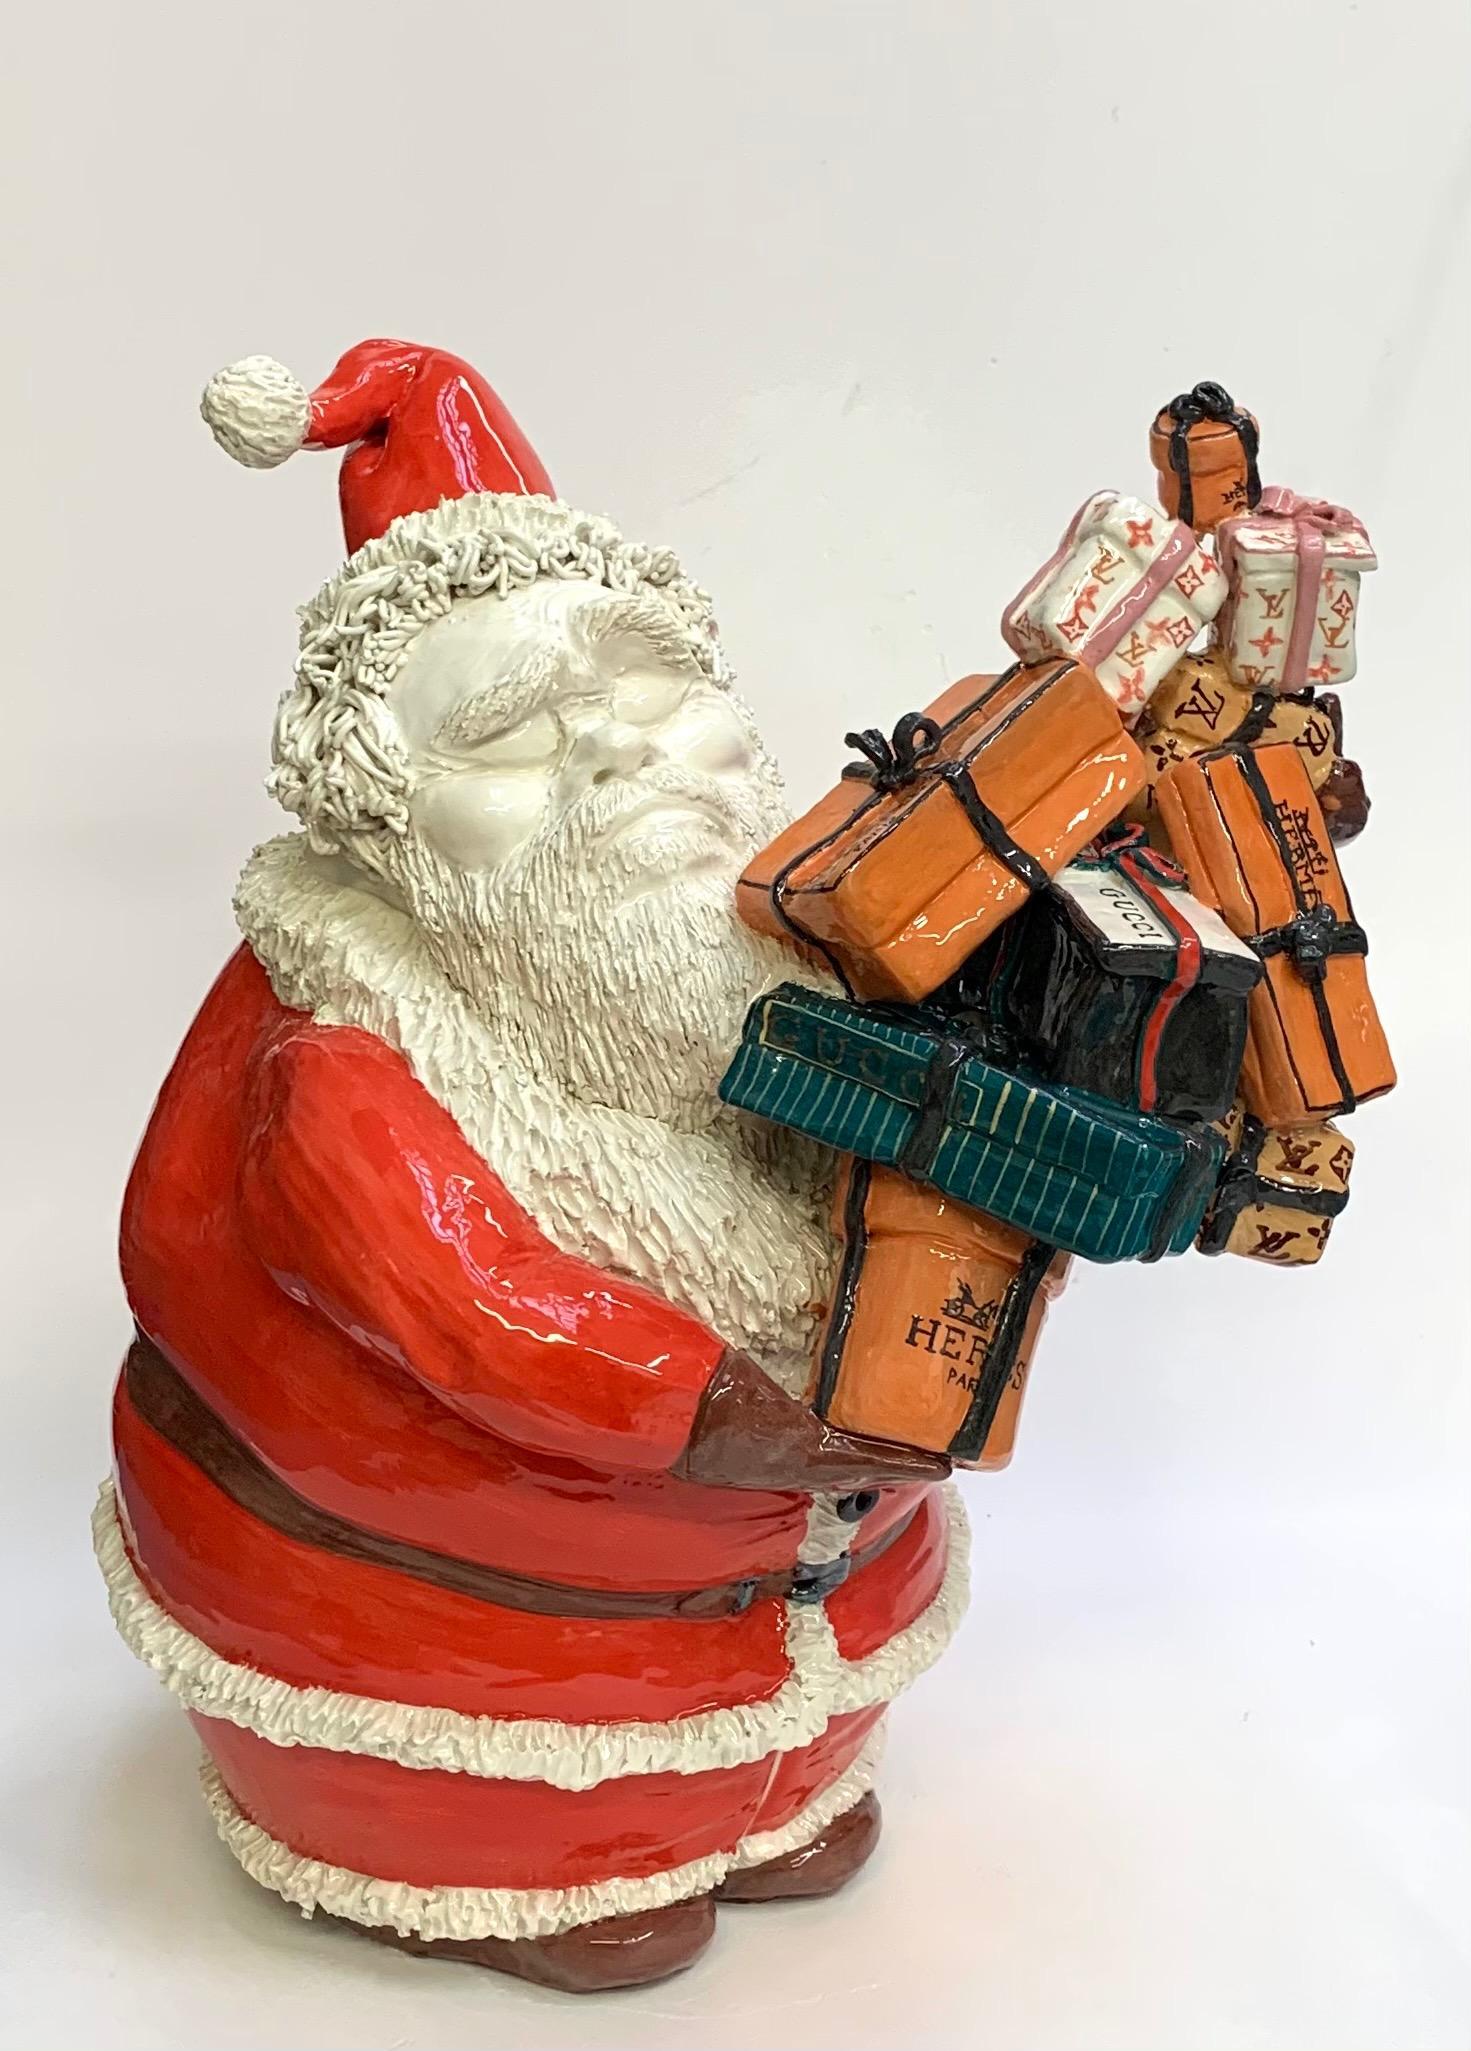 The piece is a funny revisiting of Santa Claus bringing his famous Christmas gifts. 
Our designer creates these pieces completely by hand.
    